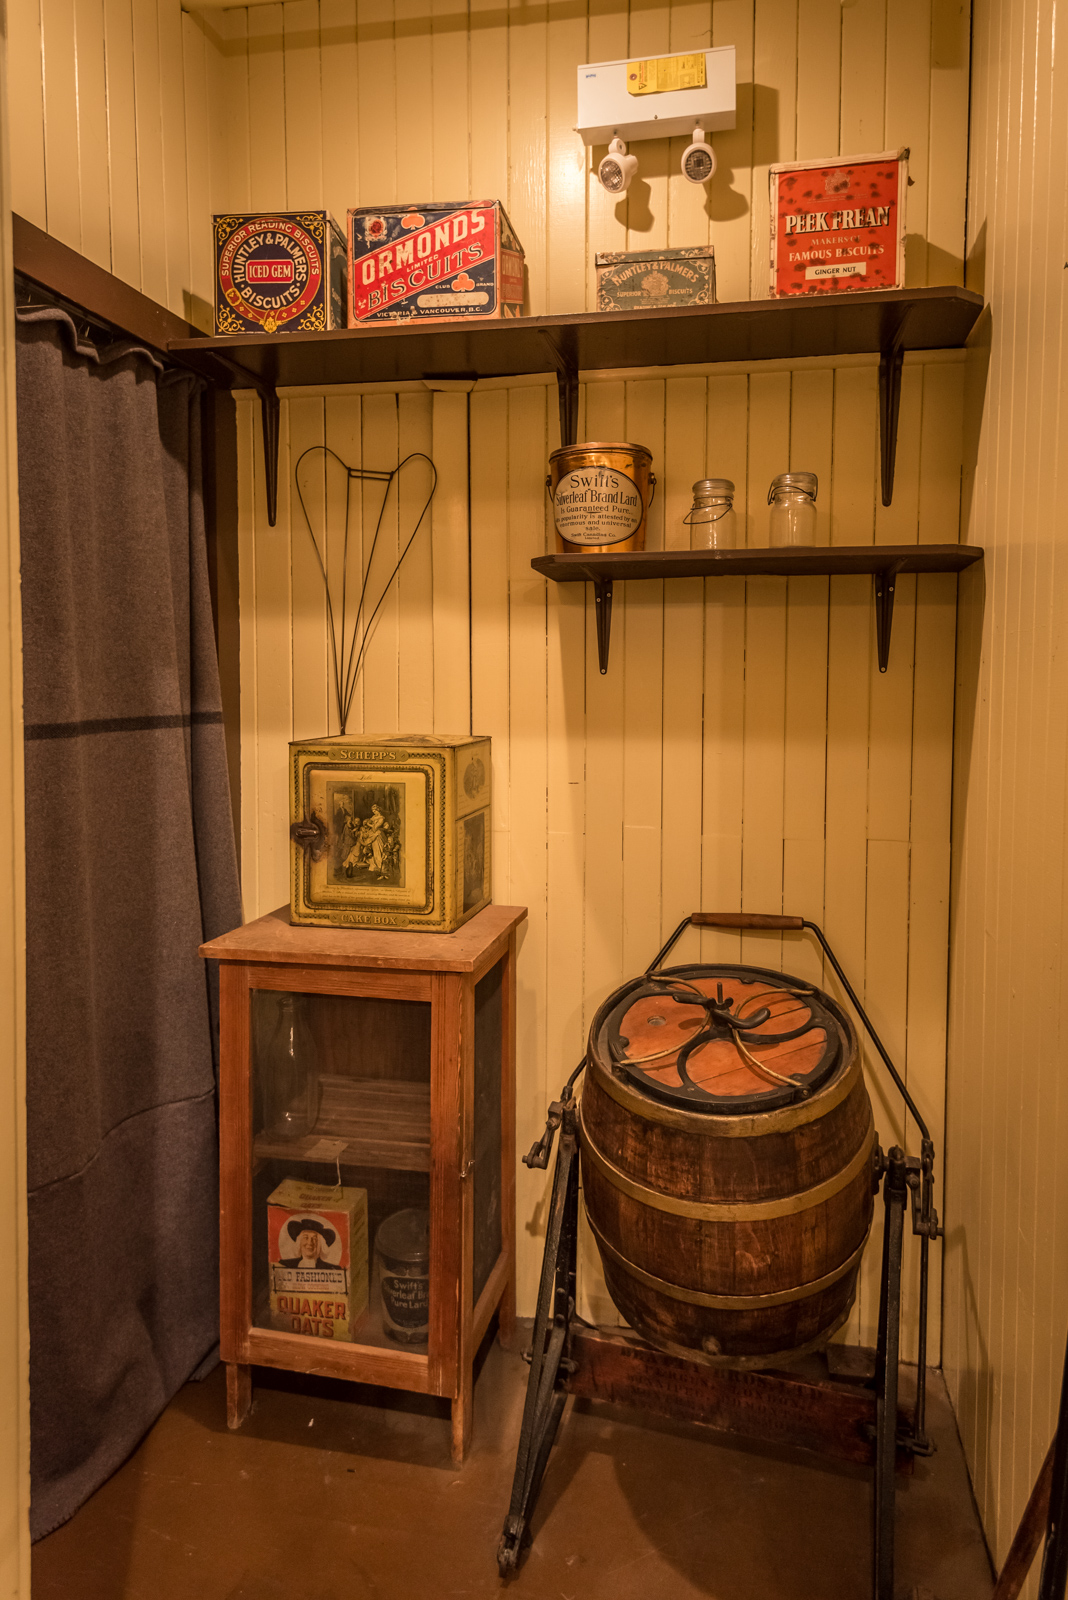 Pantry of the past